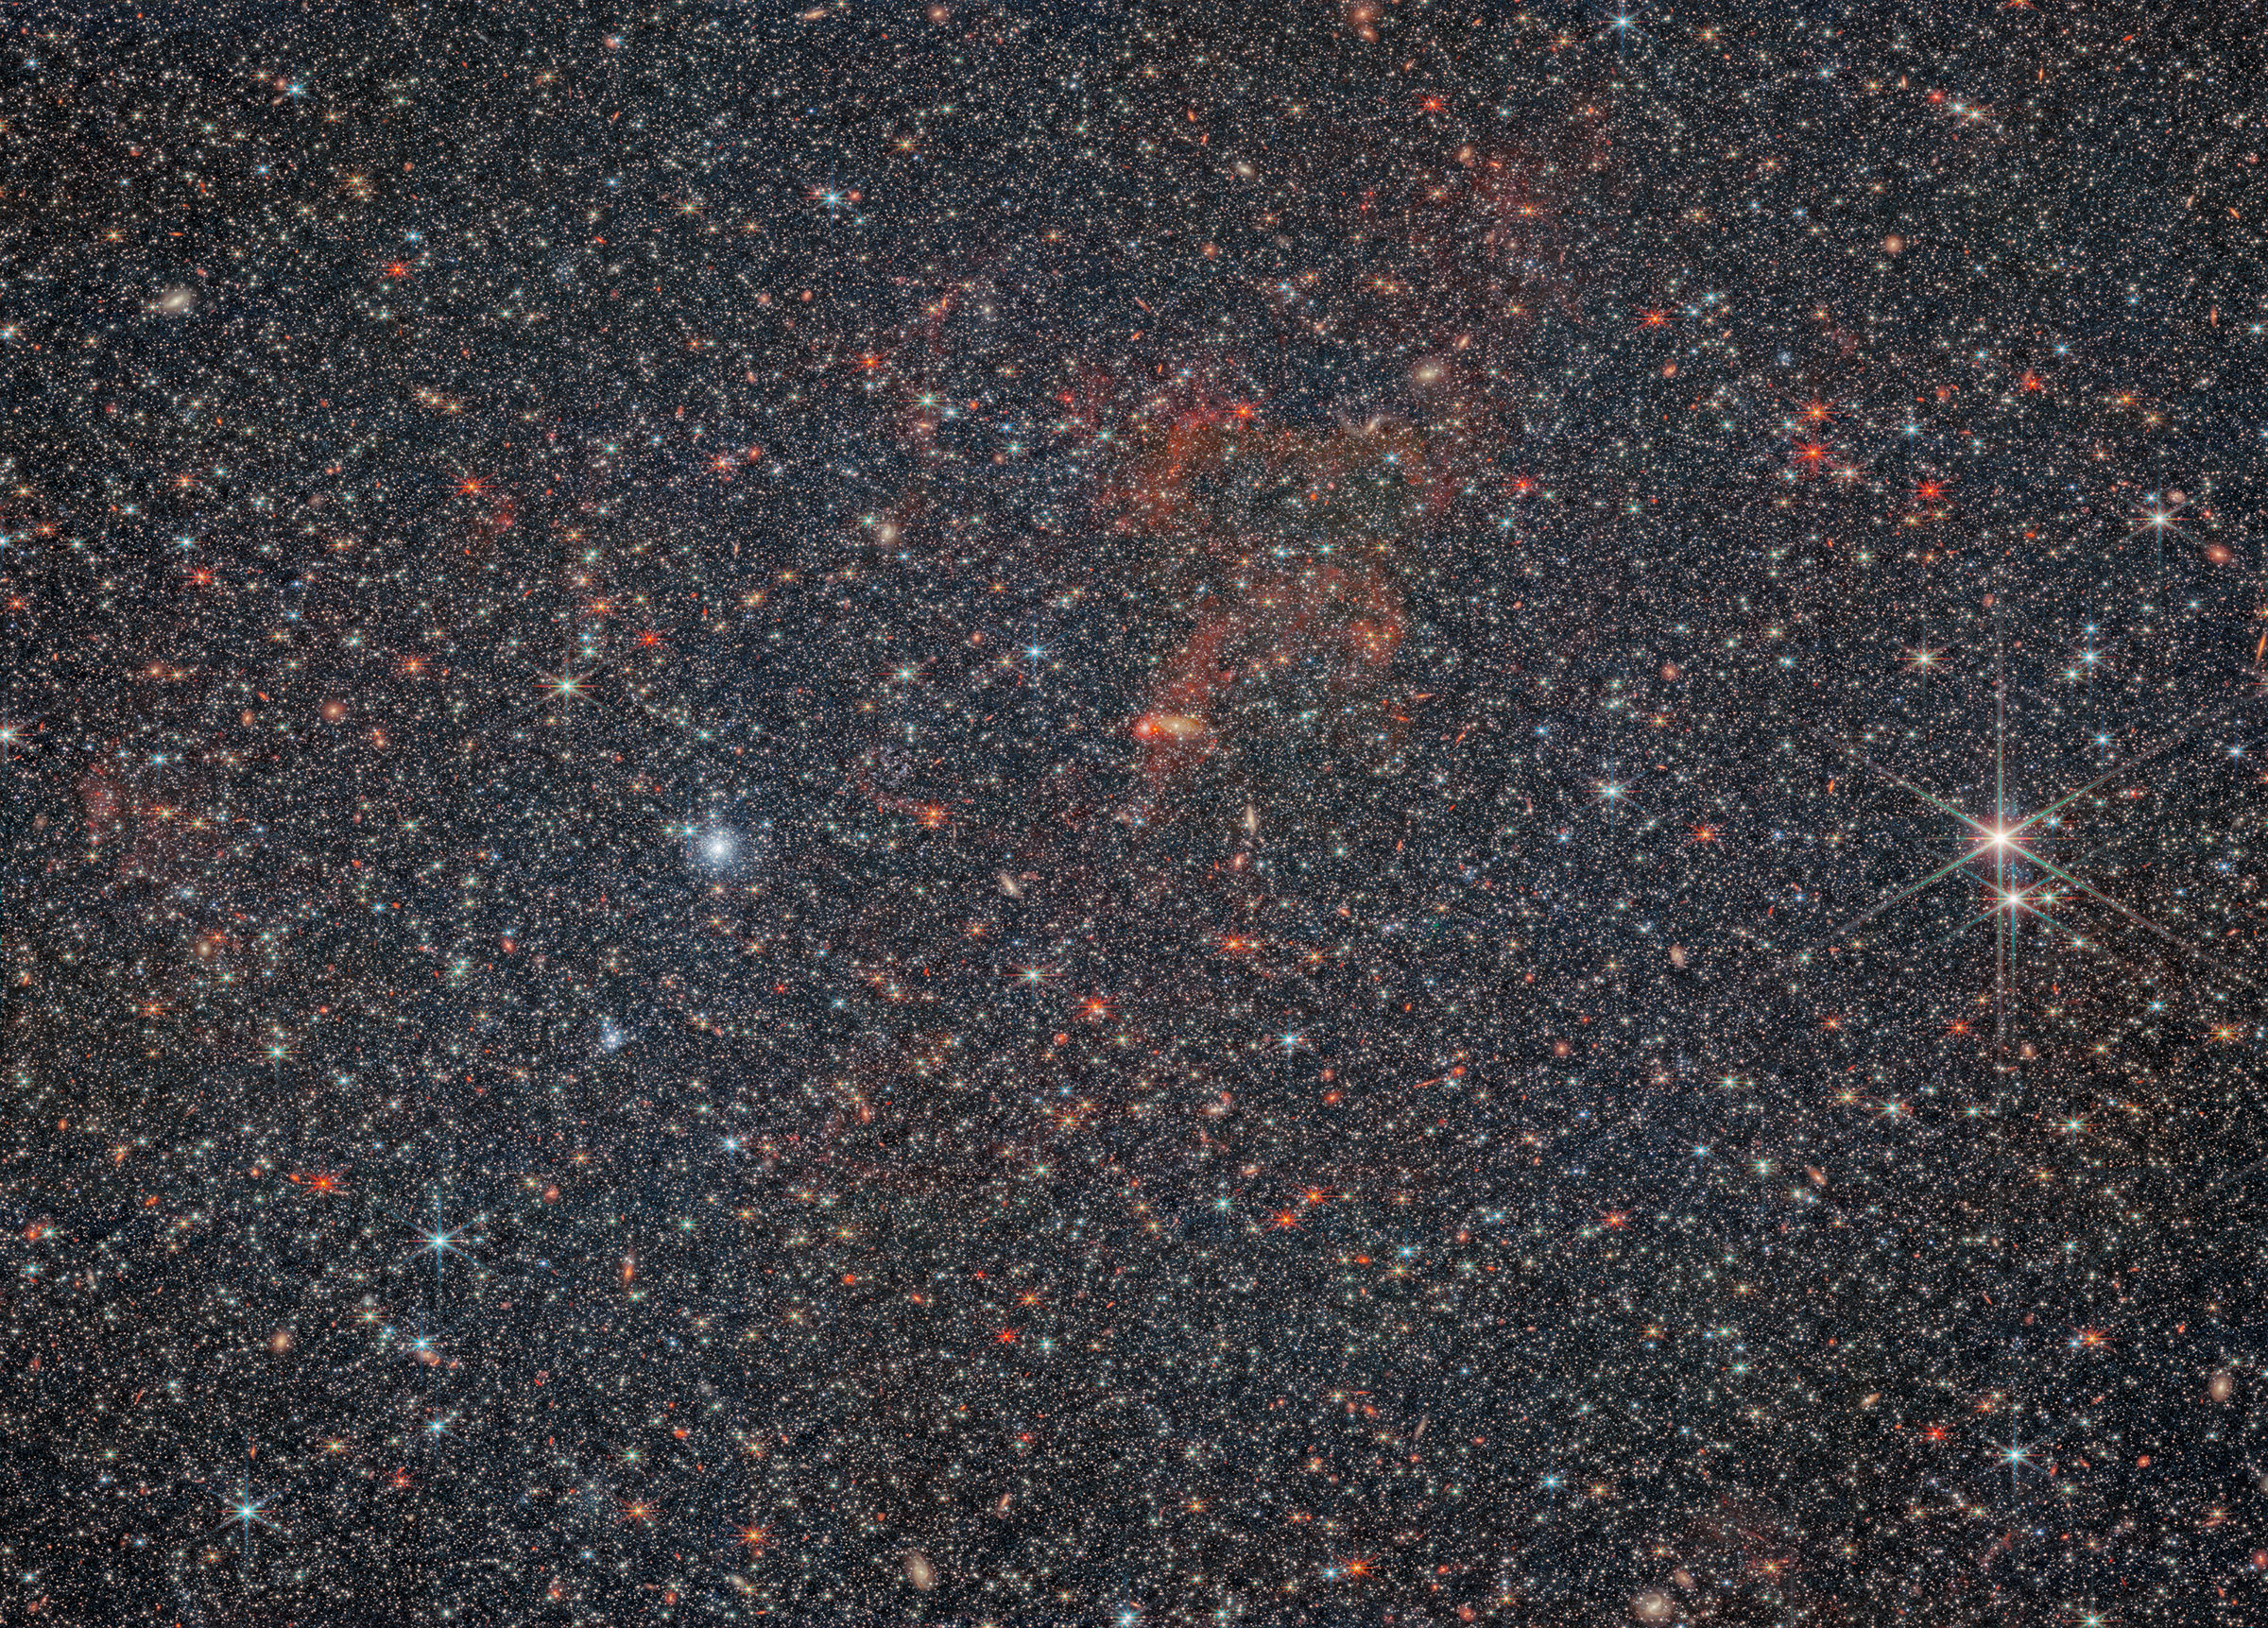 A huge, dense field completely filled with tiny stars. Many galaxies of various shapes and sizes can be seen hiding behind the stars. In the center, there is some faint, wispy, dark red gas. A few of the stars imaged are a bit larger than the rest, with visible diffraction spikes. Two foreground stars are particularly large and bright on the right side.